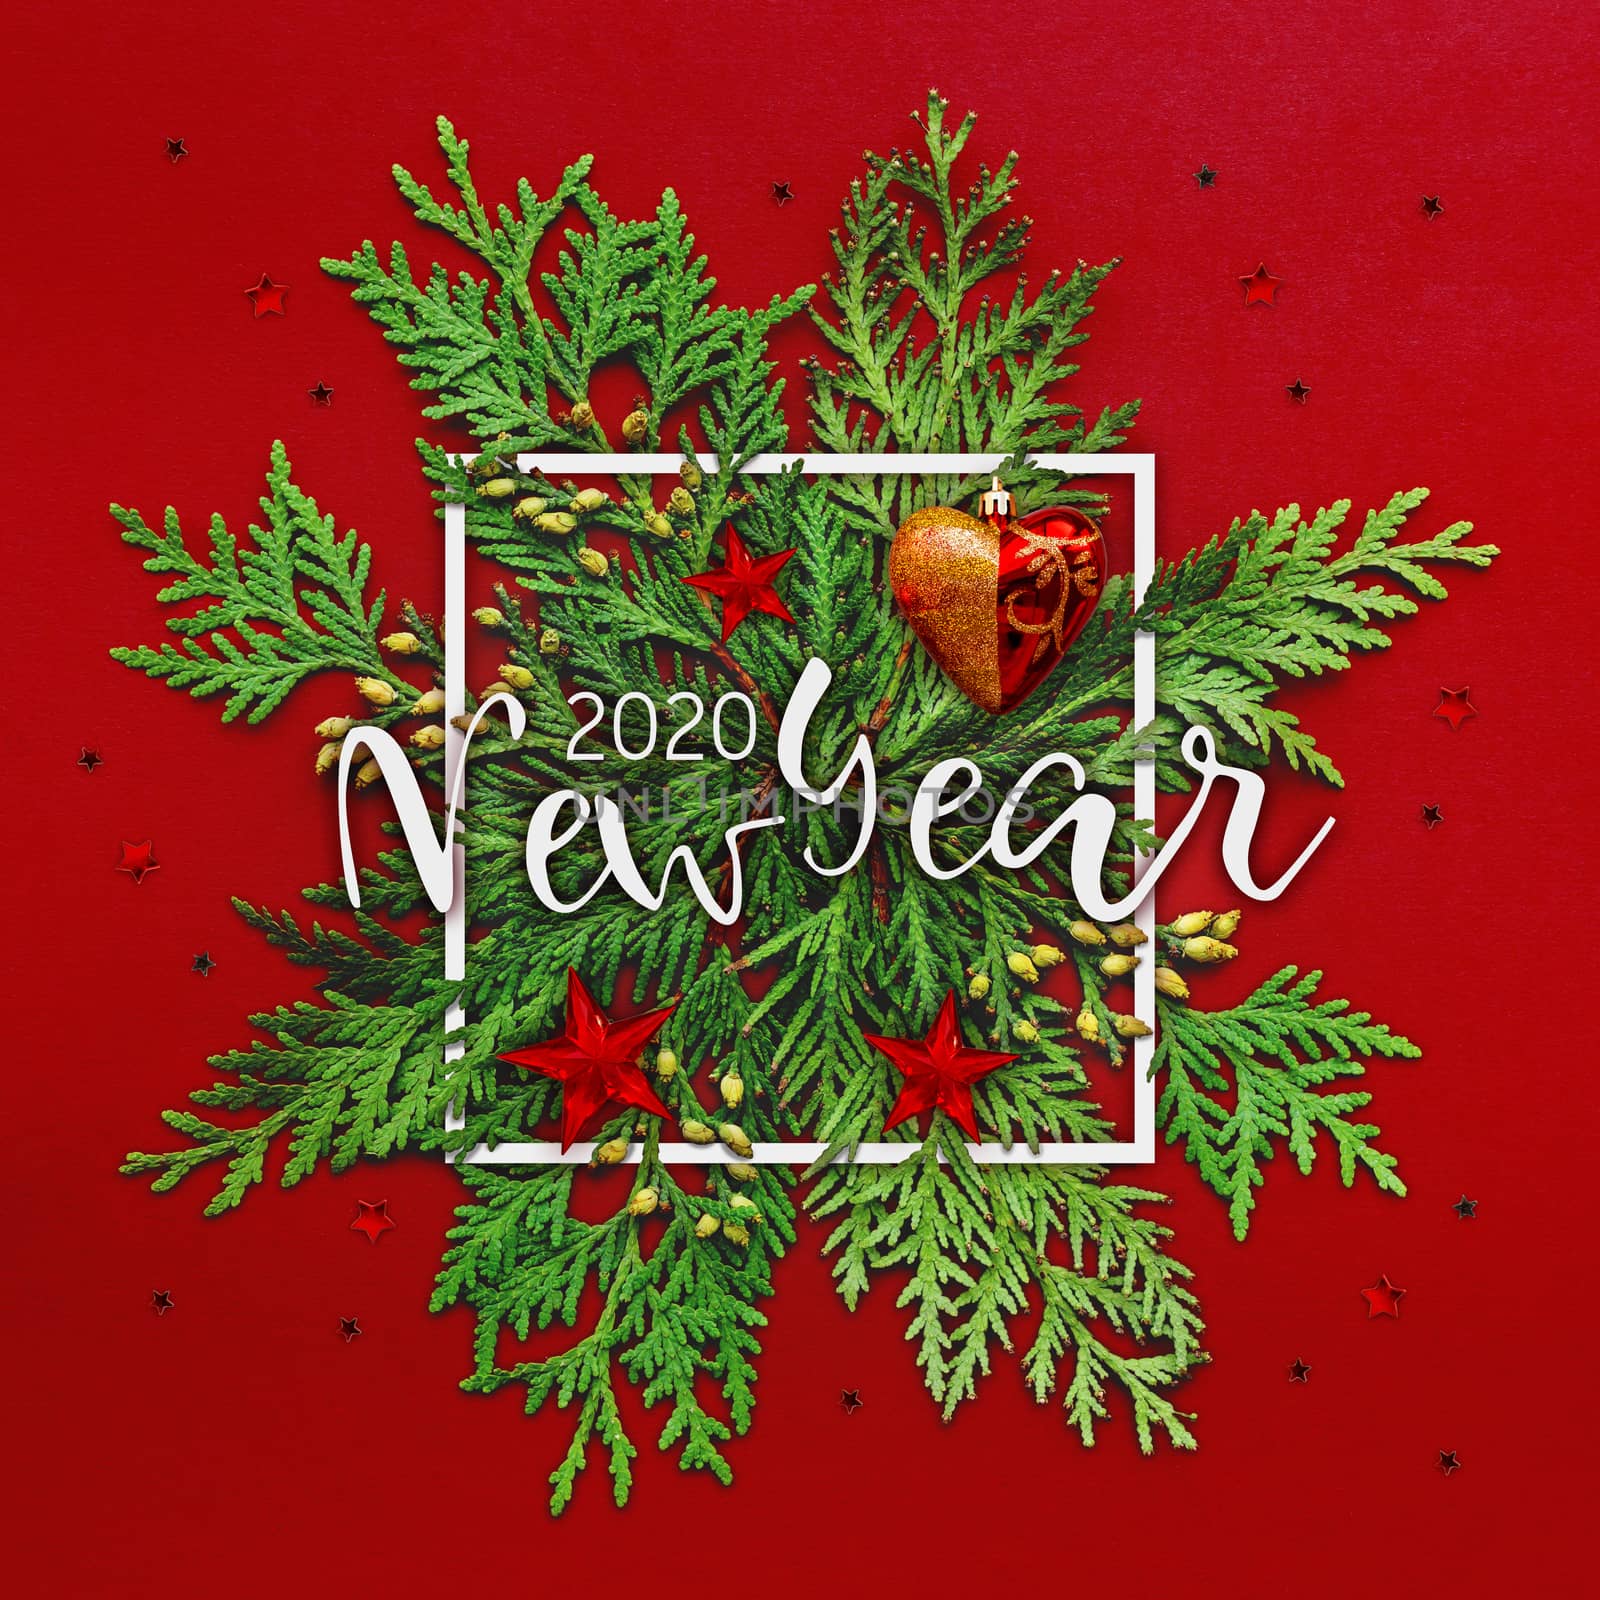 Christmas background with thuja branches and words NEW YEAR 2020 in white square frame. Trendy Xmas greeting with stars and ball decorations on red backdrop.